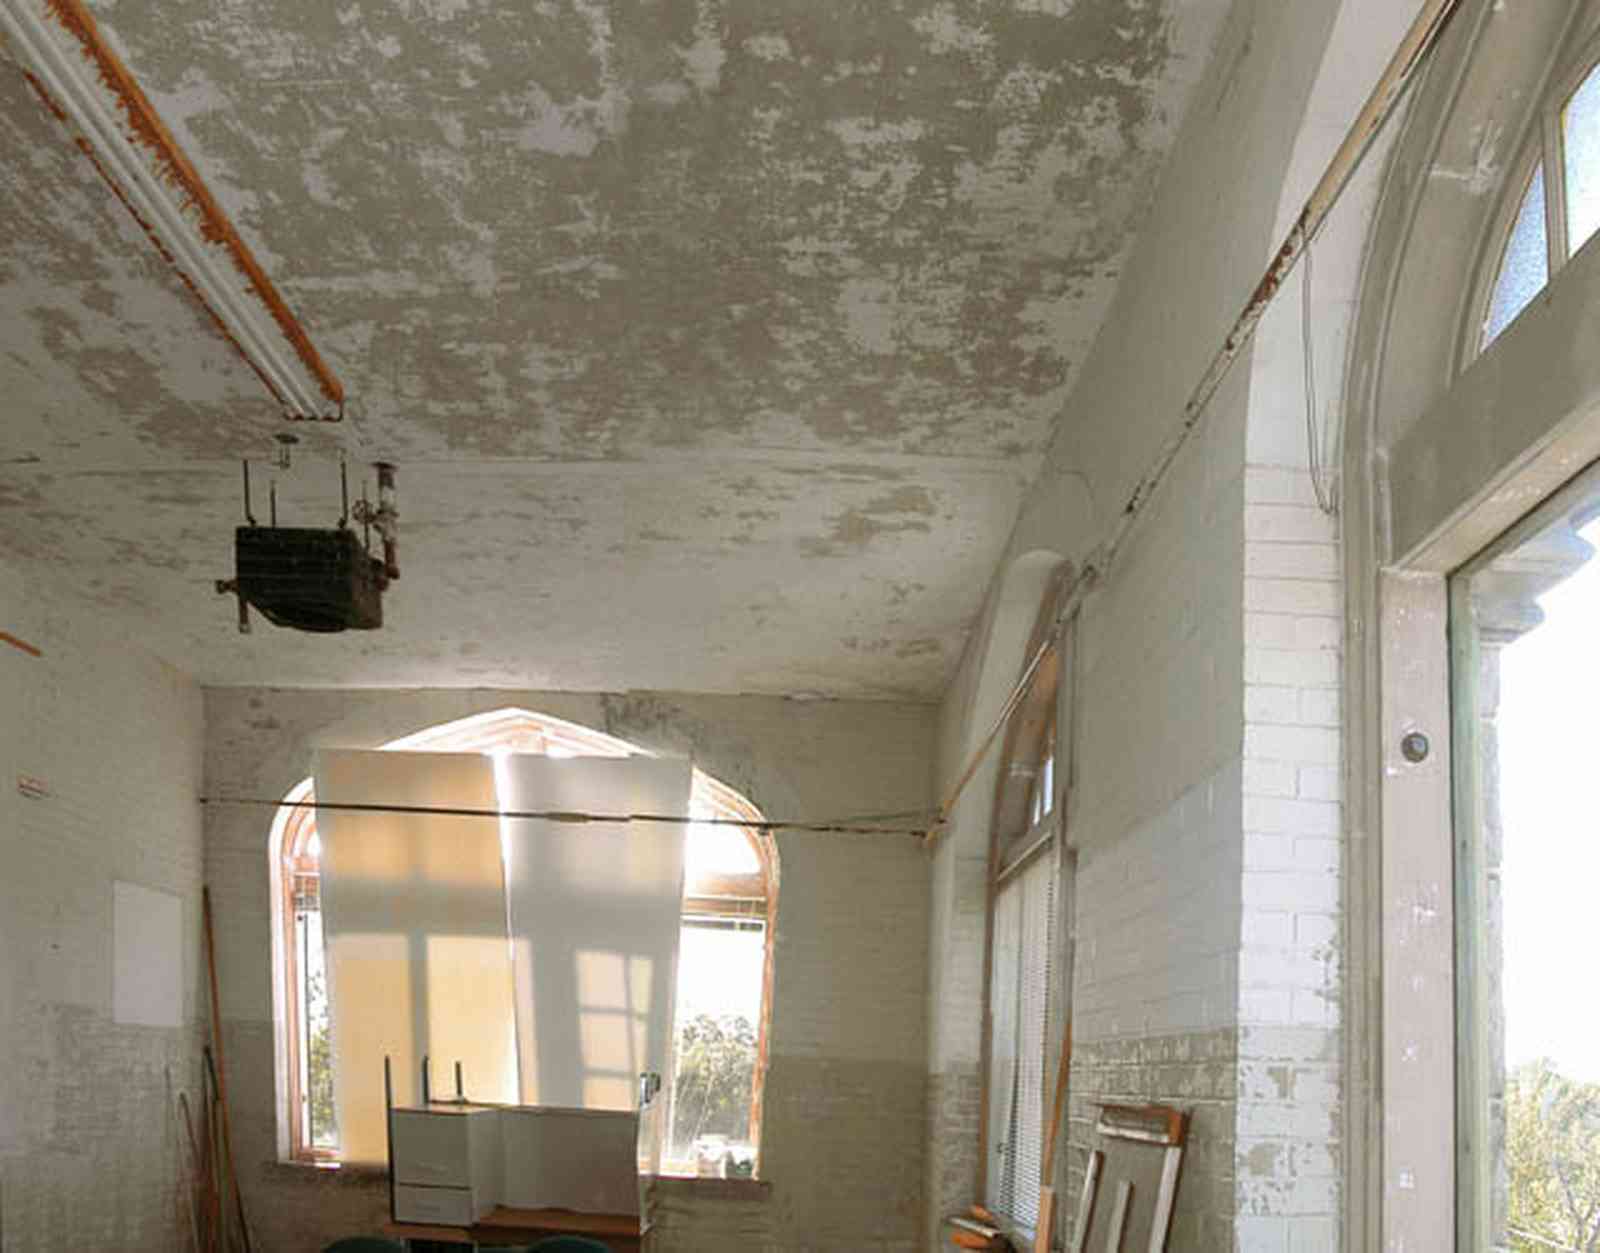 East-Hill:-Tower-East:-Old-Sacred-Heart-Hospital_45b.jpg:  gothic revival architecture, plaster walls, upstairs windows